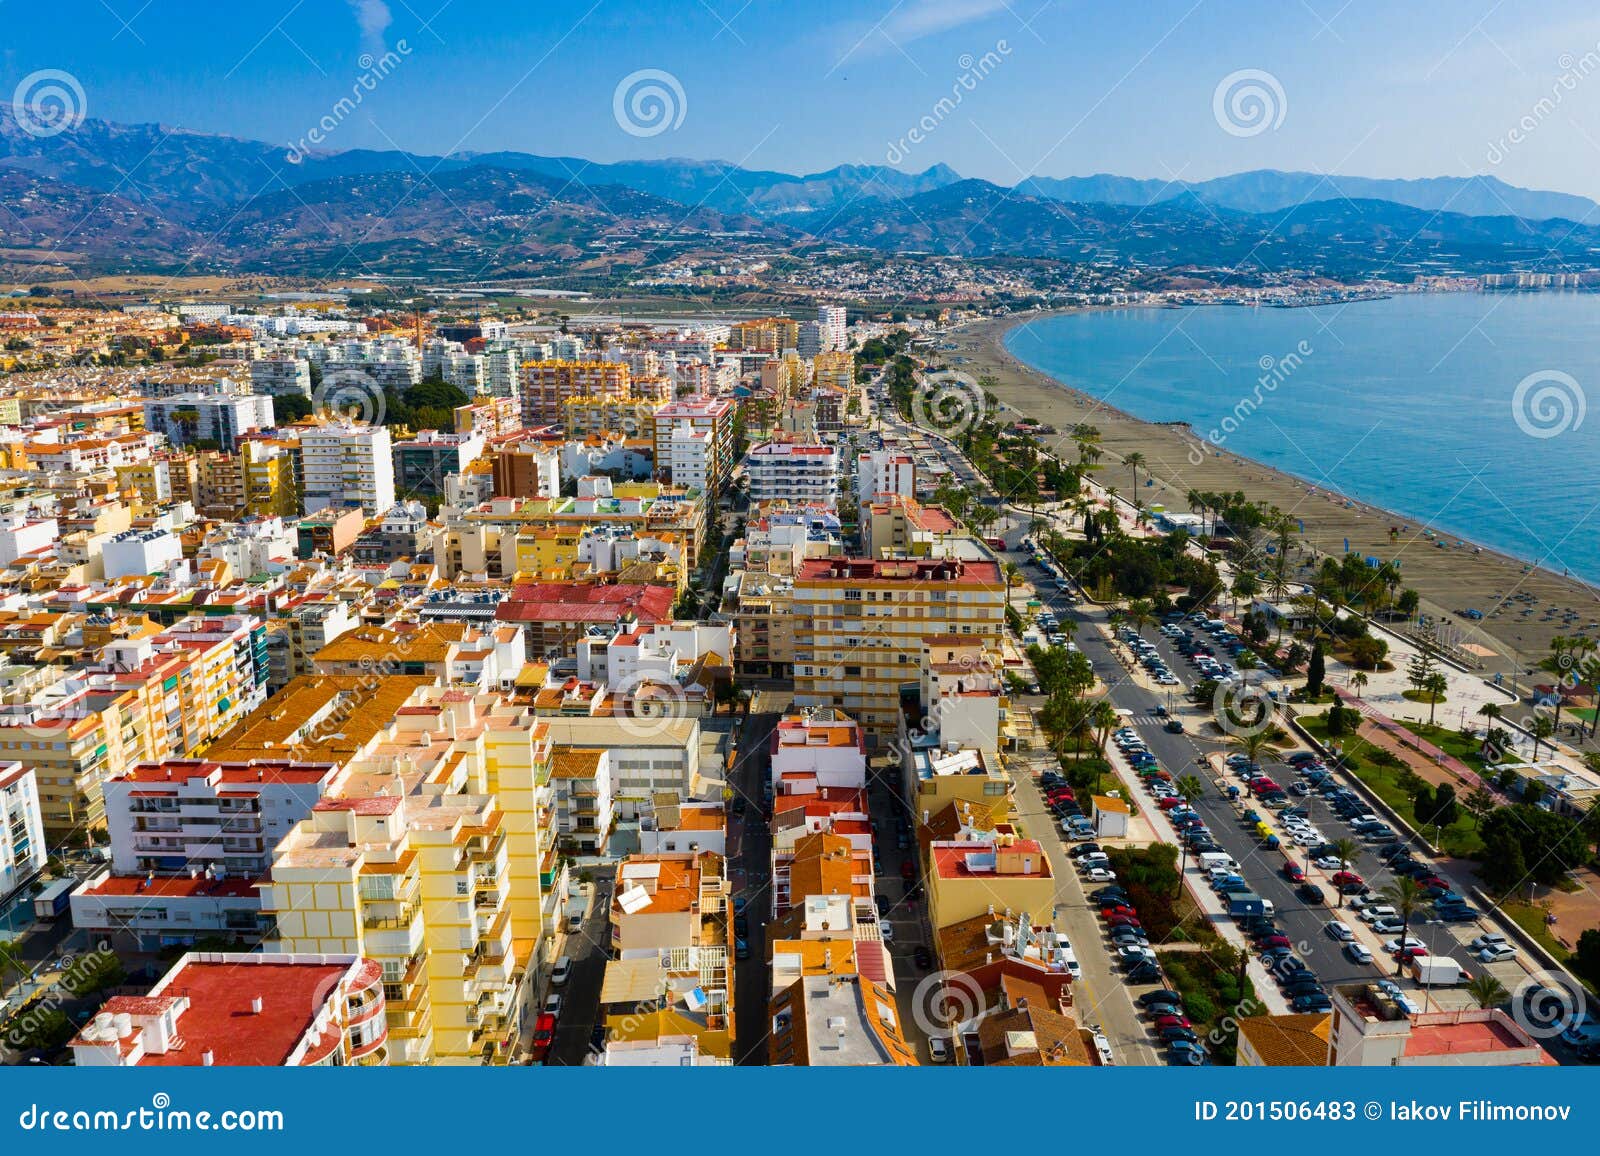 view from drone of spanish town of torre del mar